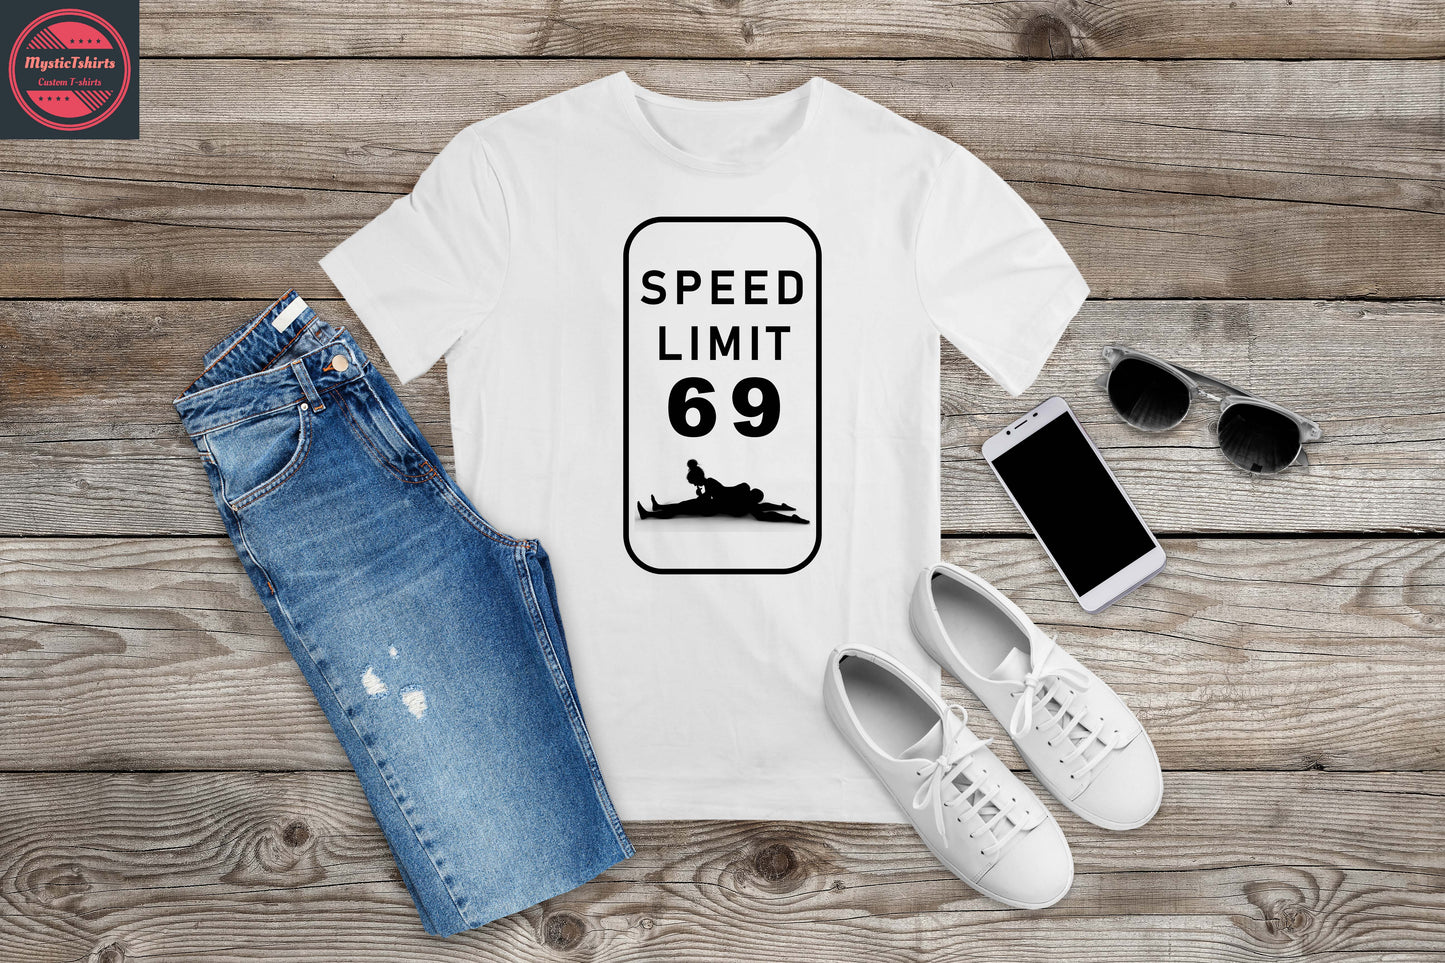 442. SPEED LIMIT 69, Custom Made Shirt, Personalized T-Shirt, Custom Text, Make Your Own Shirt, Custom Tee